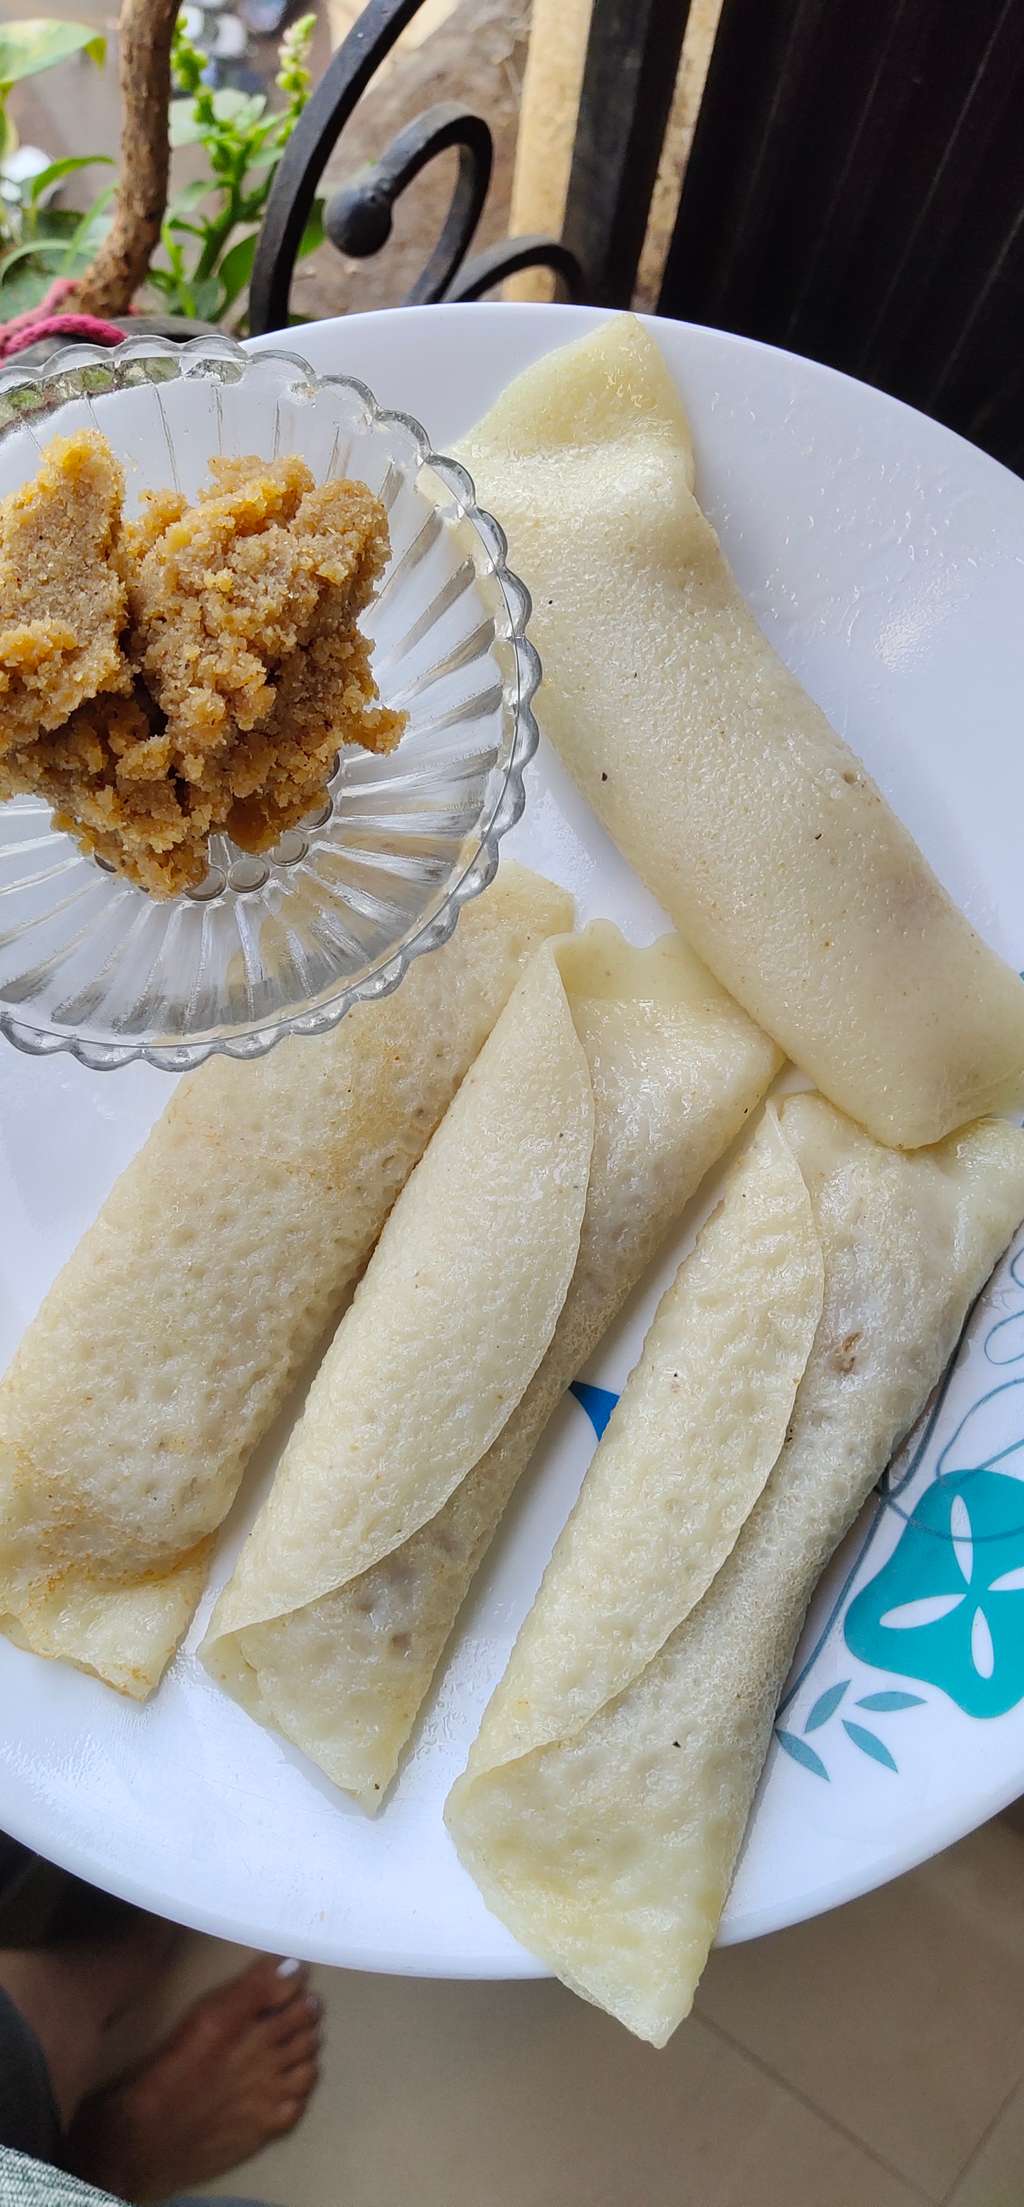 Crepes stuffed with jaggery flavored coconut